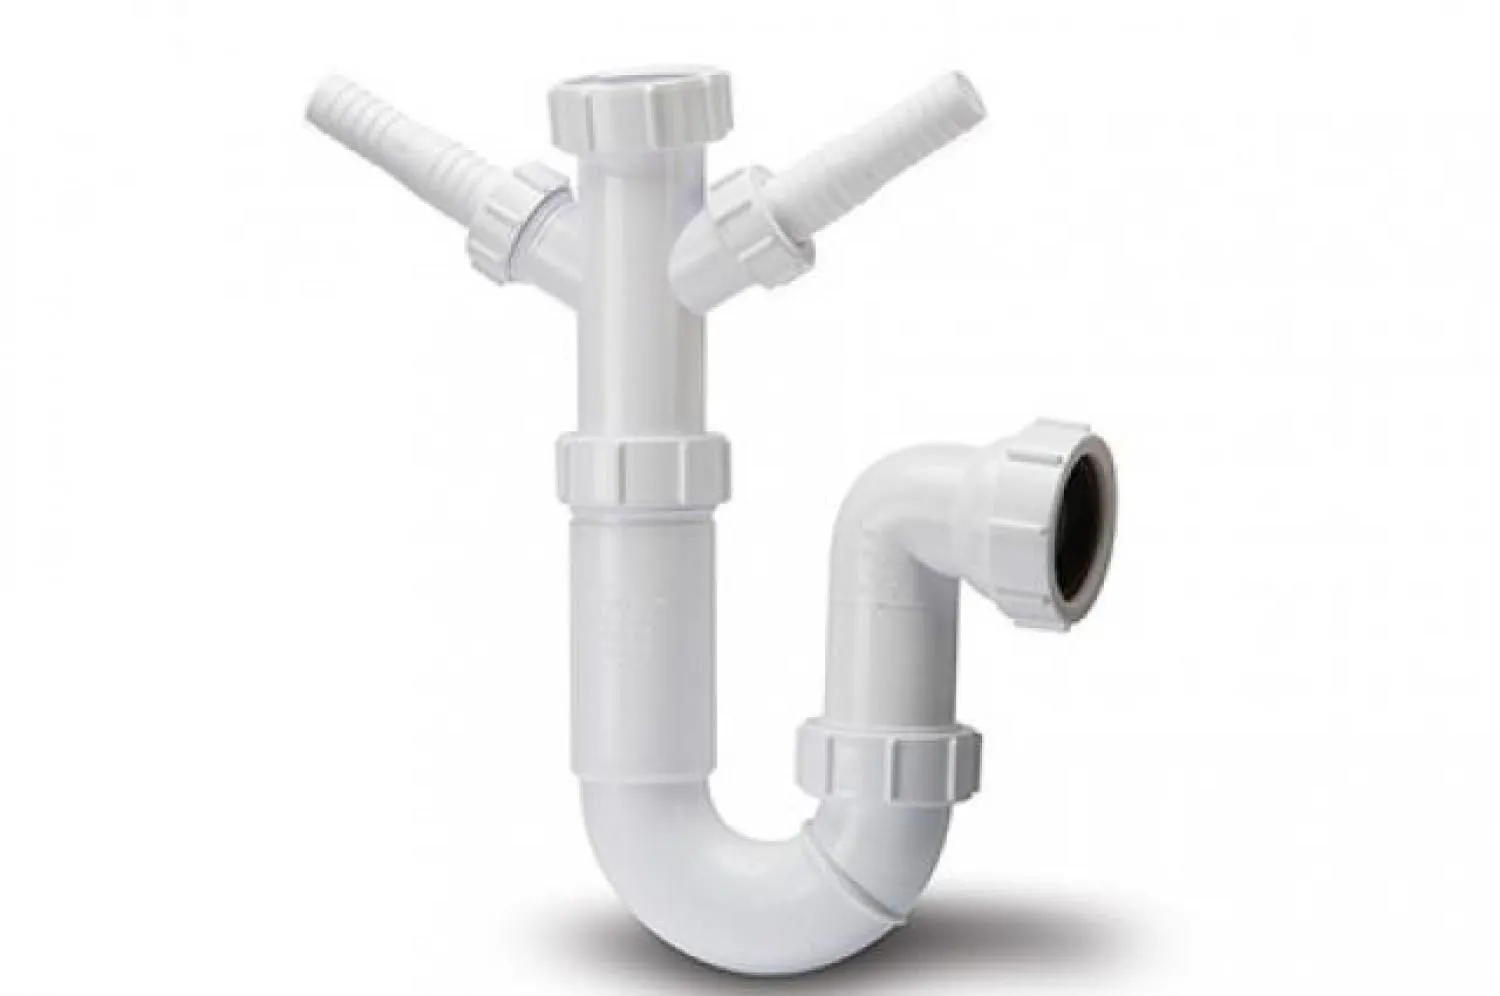 Polypipe Trap Appliance Trap Swivel "P" 40mm with Double Adjustable Inlet 75mm  White   PPT4200